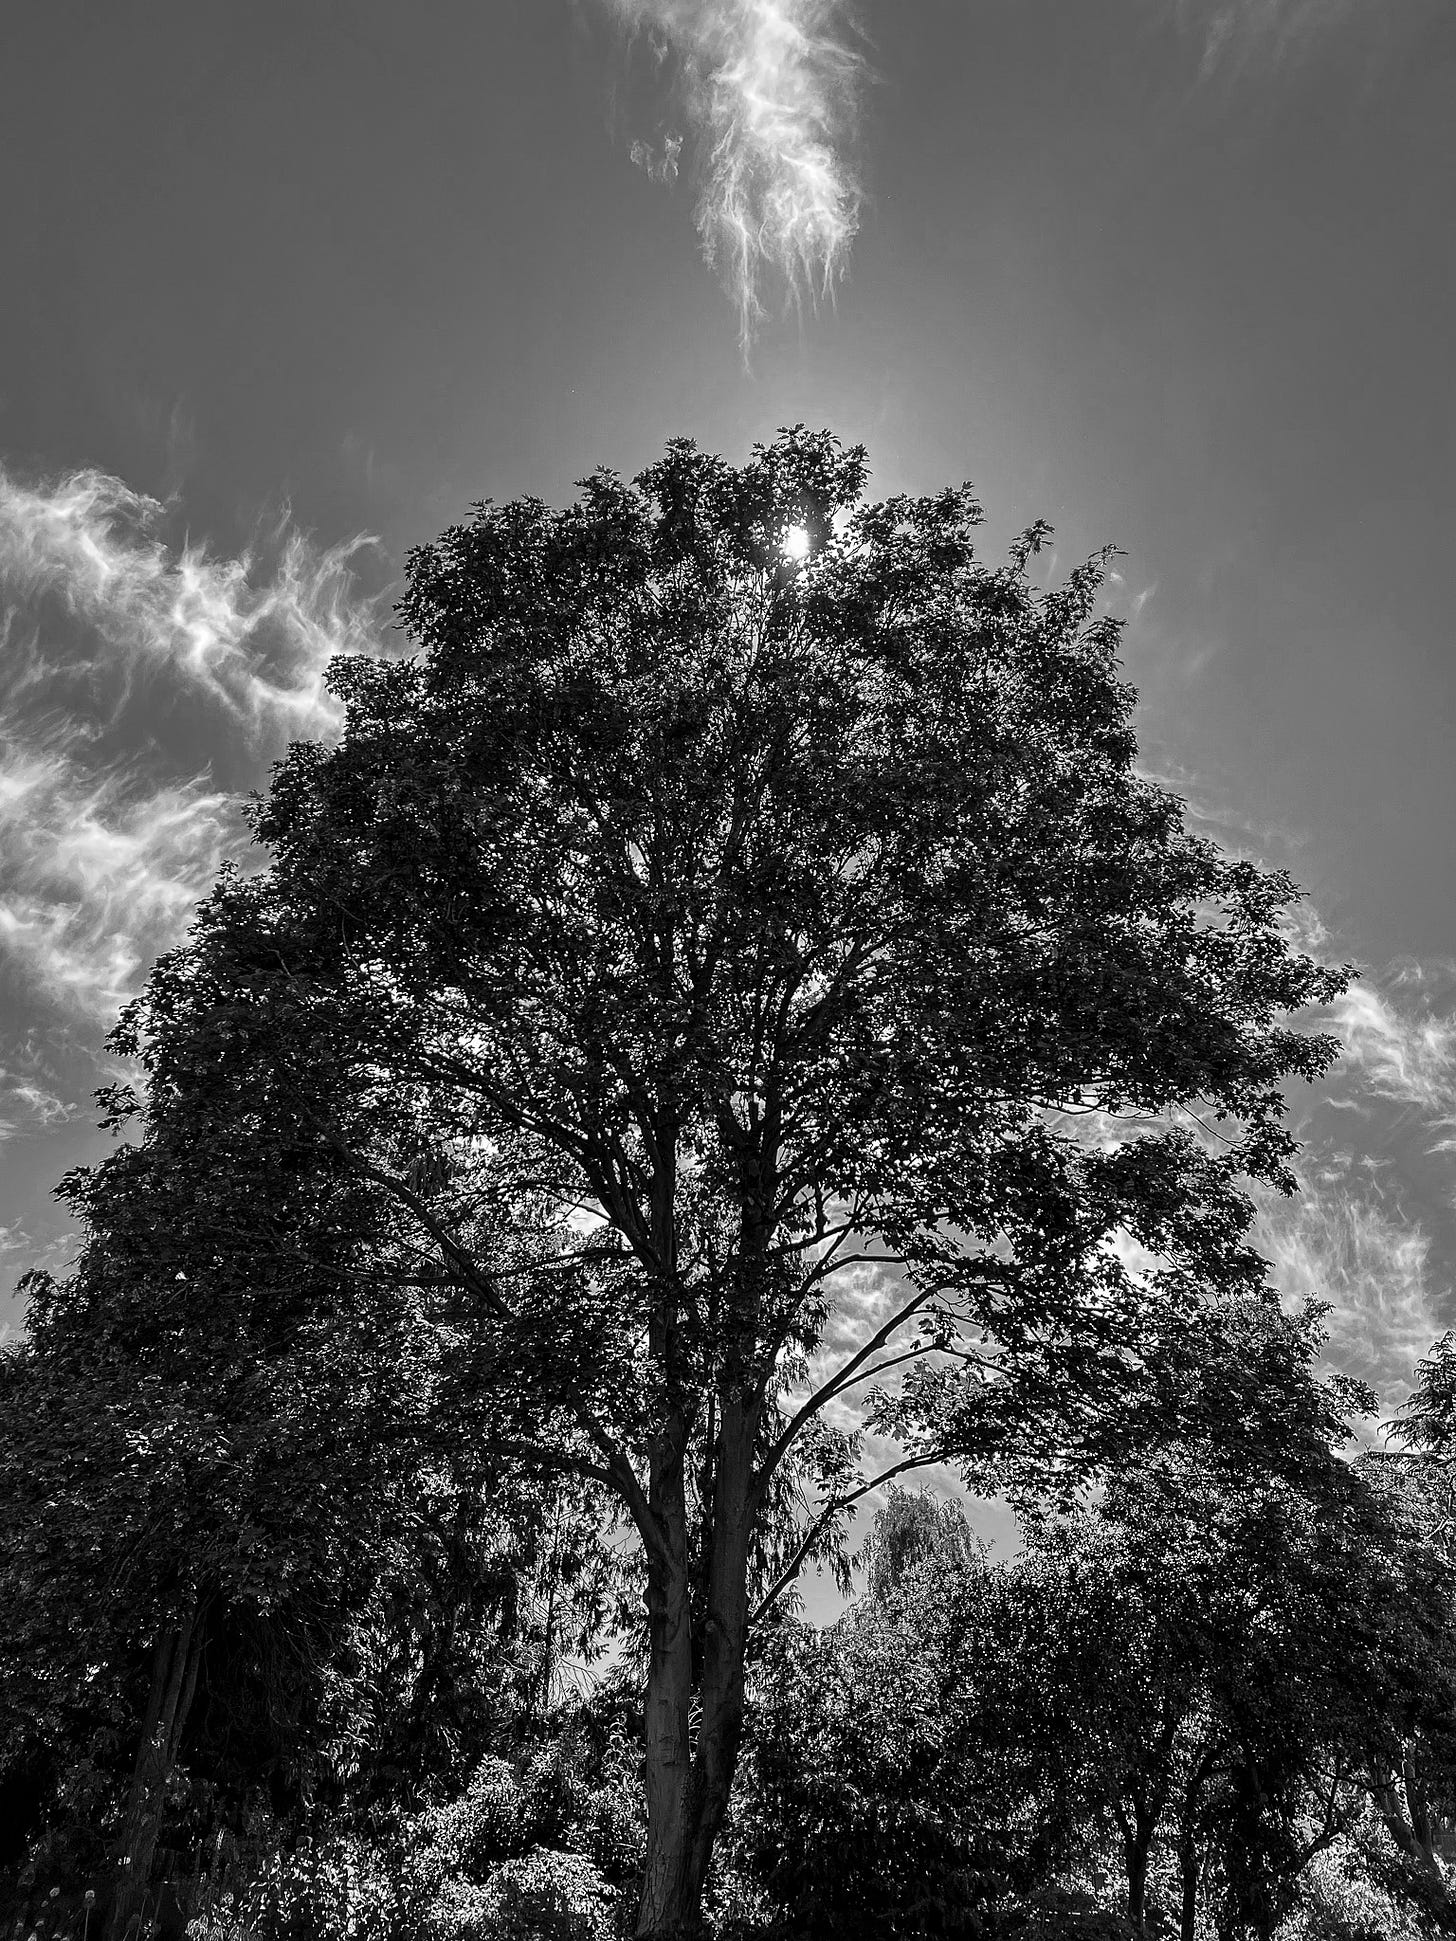 a black and whoite photograph of a tall leafy tree in the foreground, wispy clouds in the background